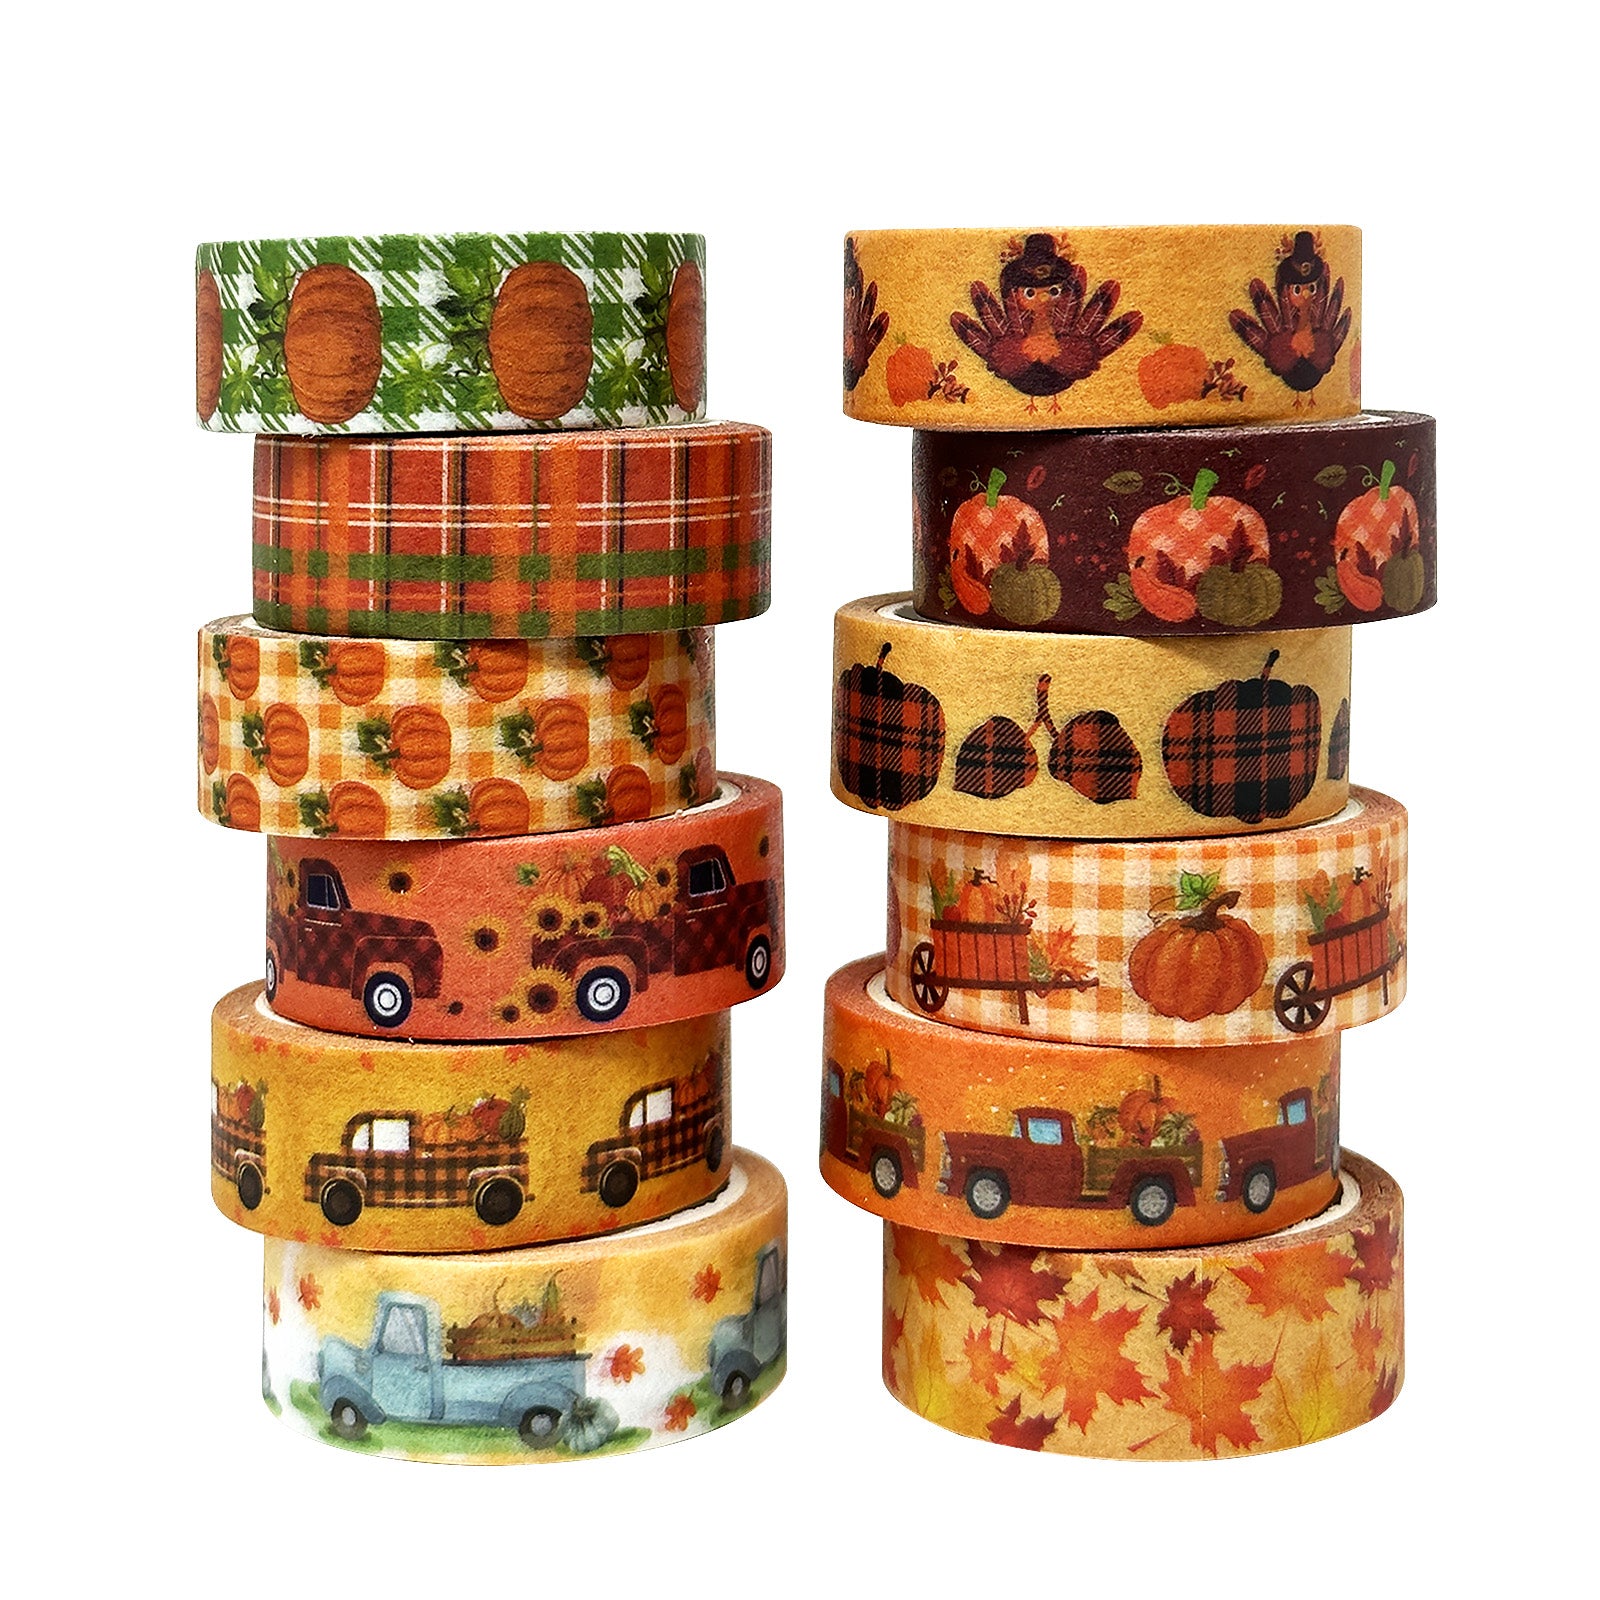 Wrapables Decorative Washi Tape for Scrapbooking, Stationery, Diary, Card Making